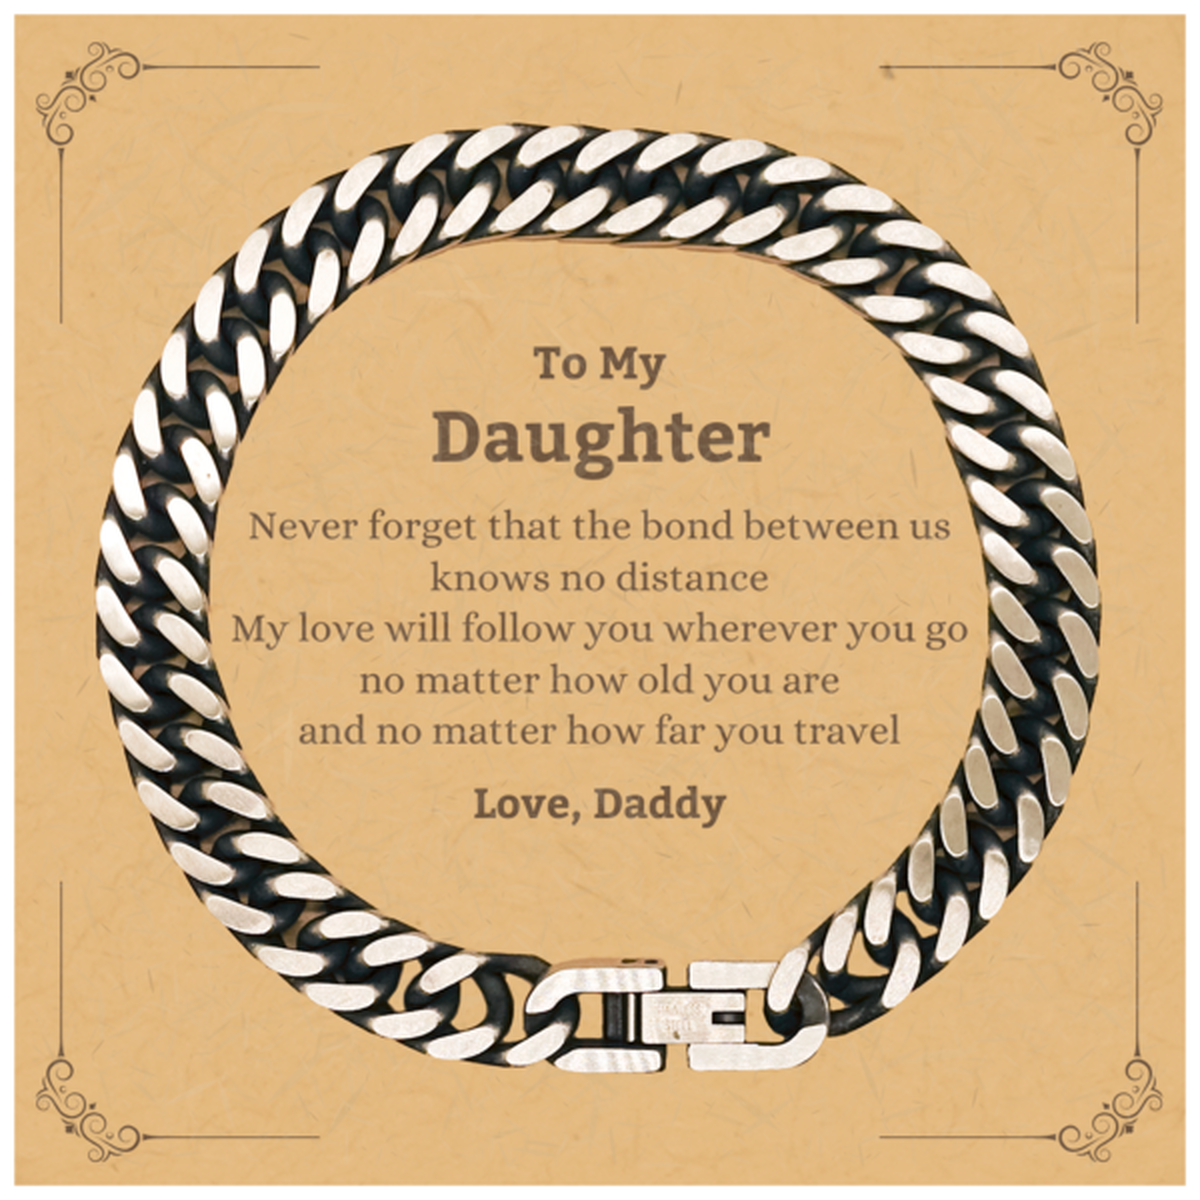 Daughter Birthday Gifts from Daddy, Adjustable Cuban Link Chain Bracelet for Daughter Christmas Graduation Unique Gifts Daughter Never forget that the bond between us knows no distance. Love, Daddy